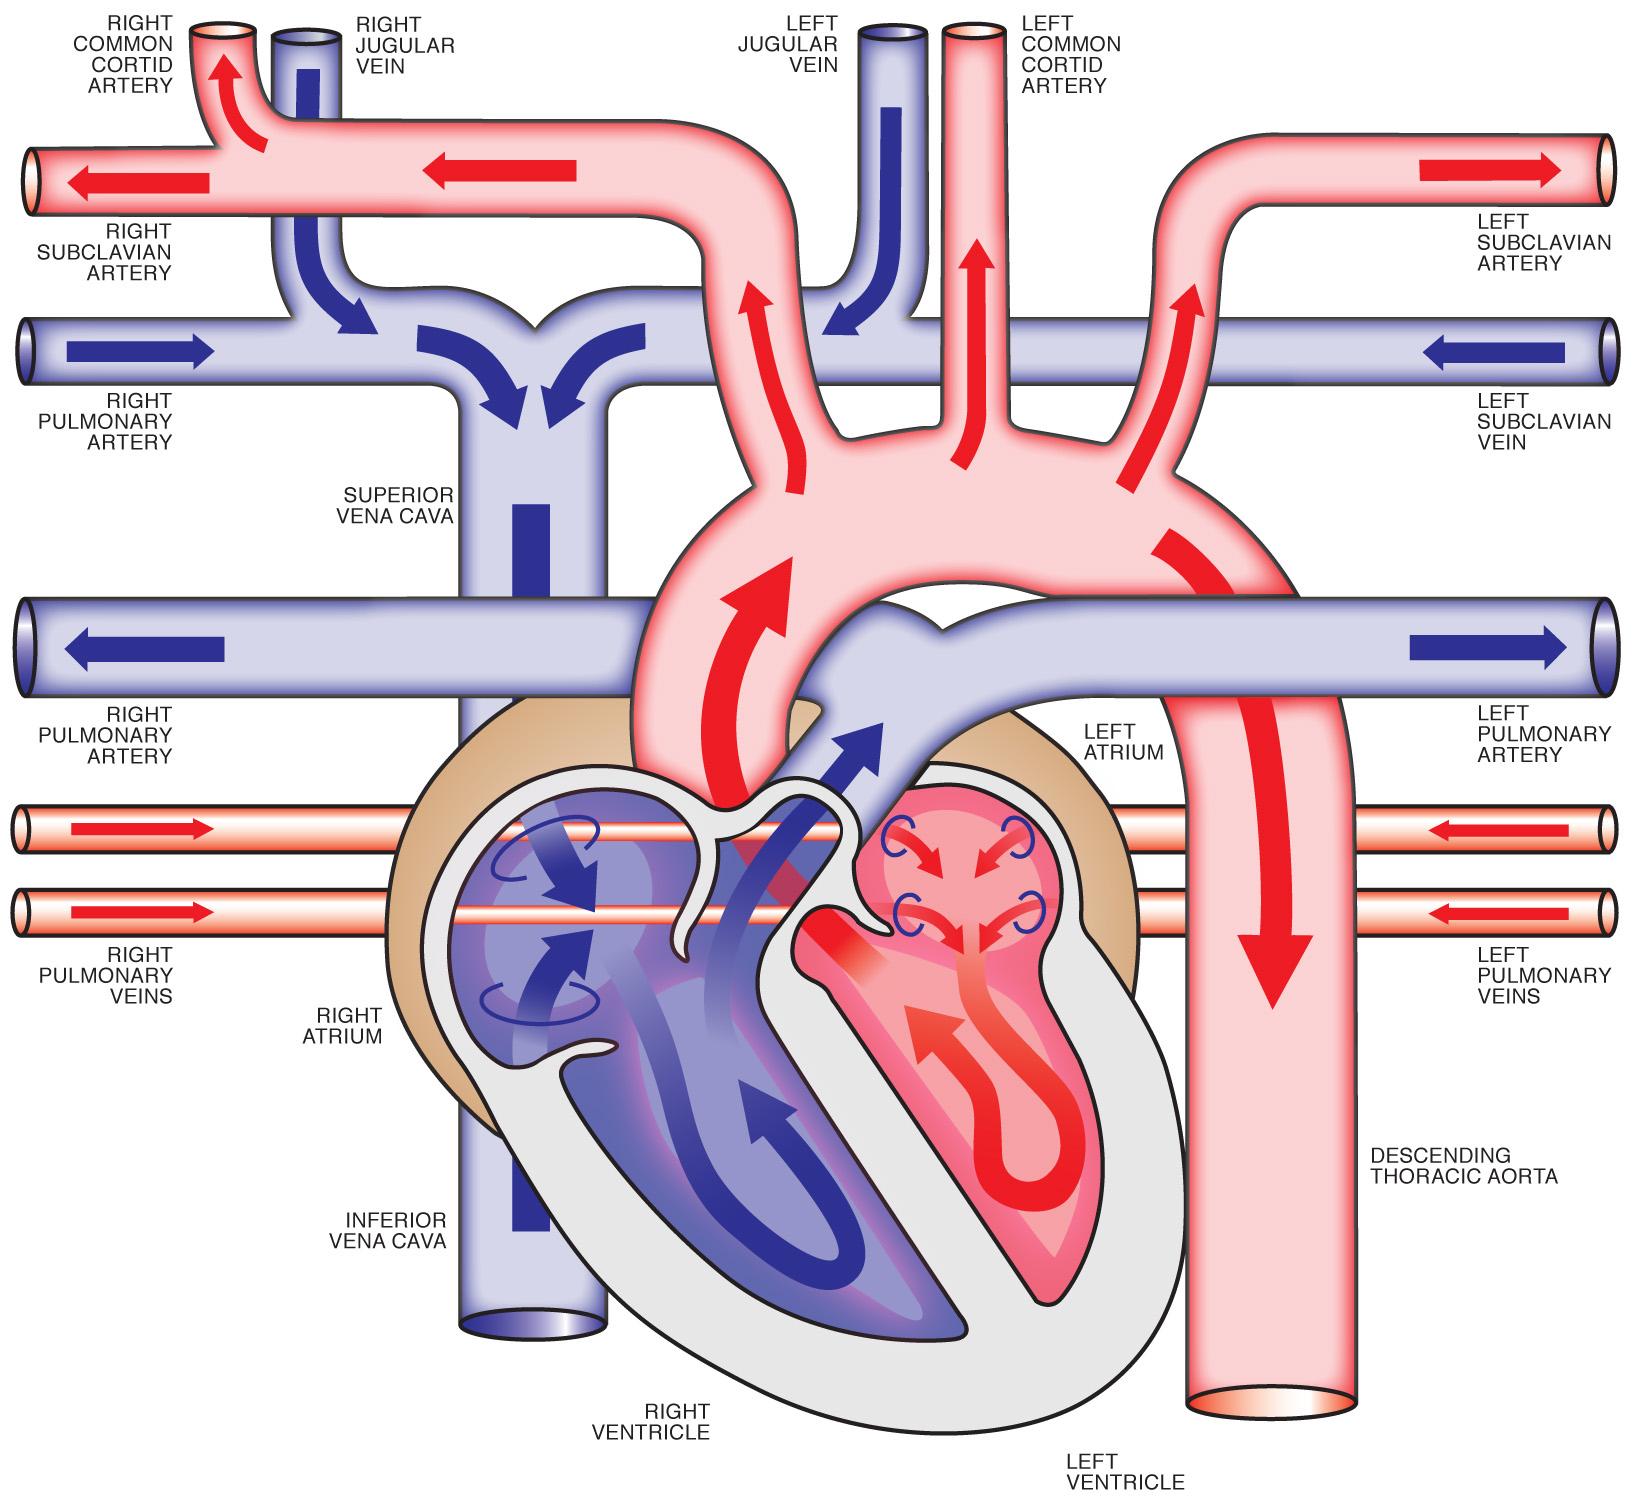 Free Heart Diagram Unlabeled, Download Free Heart Diagram Unlabeled png